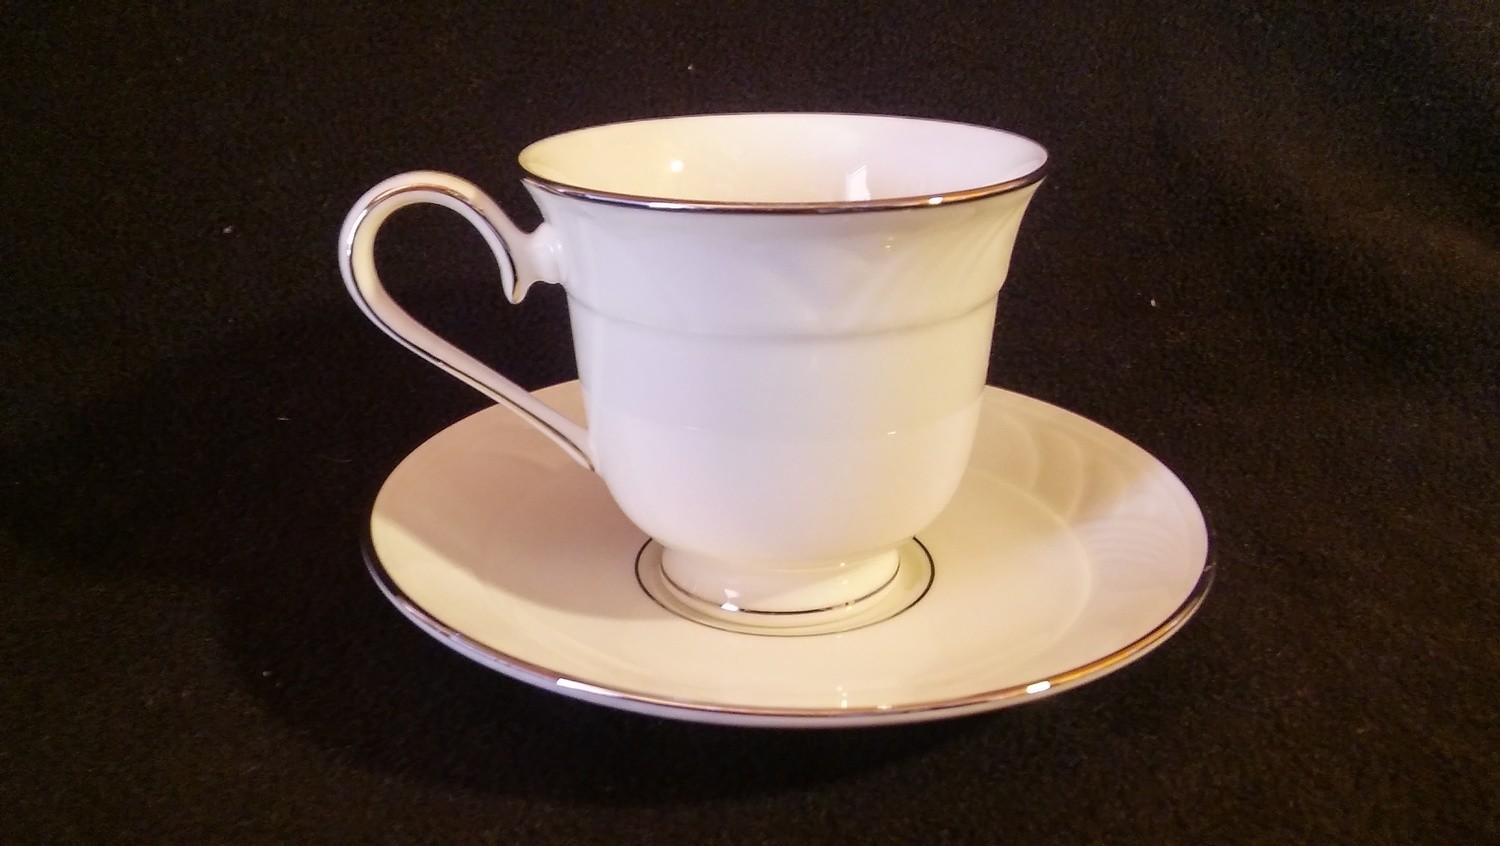 Lenox Footed Cup & Saucer, Sand Dune Platinum Pattern